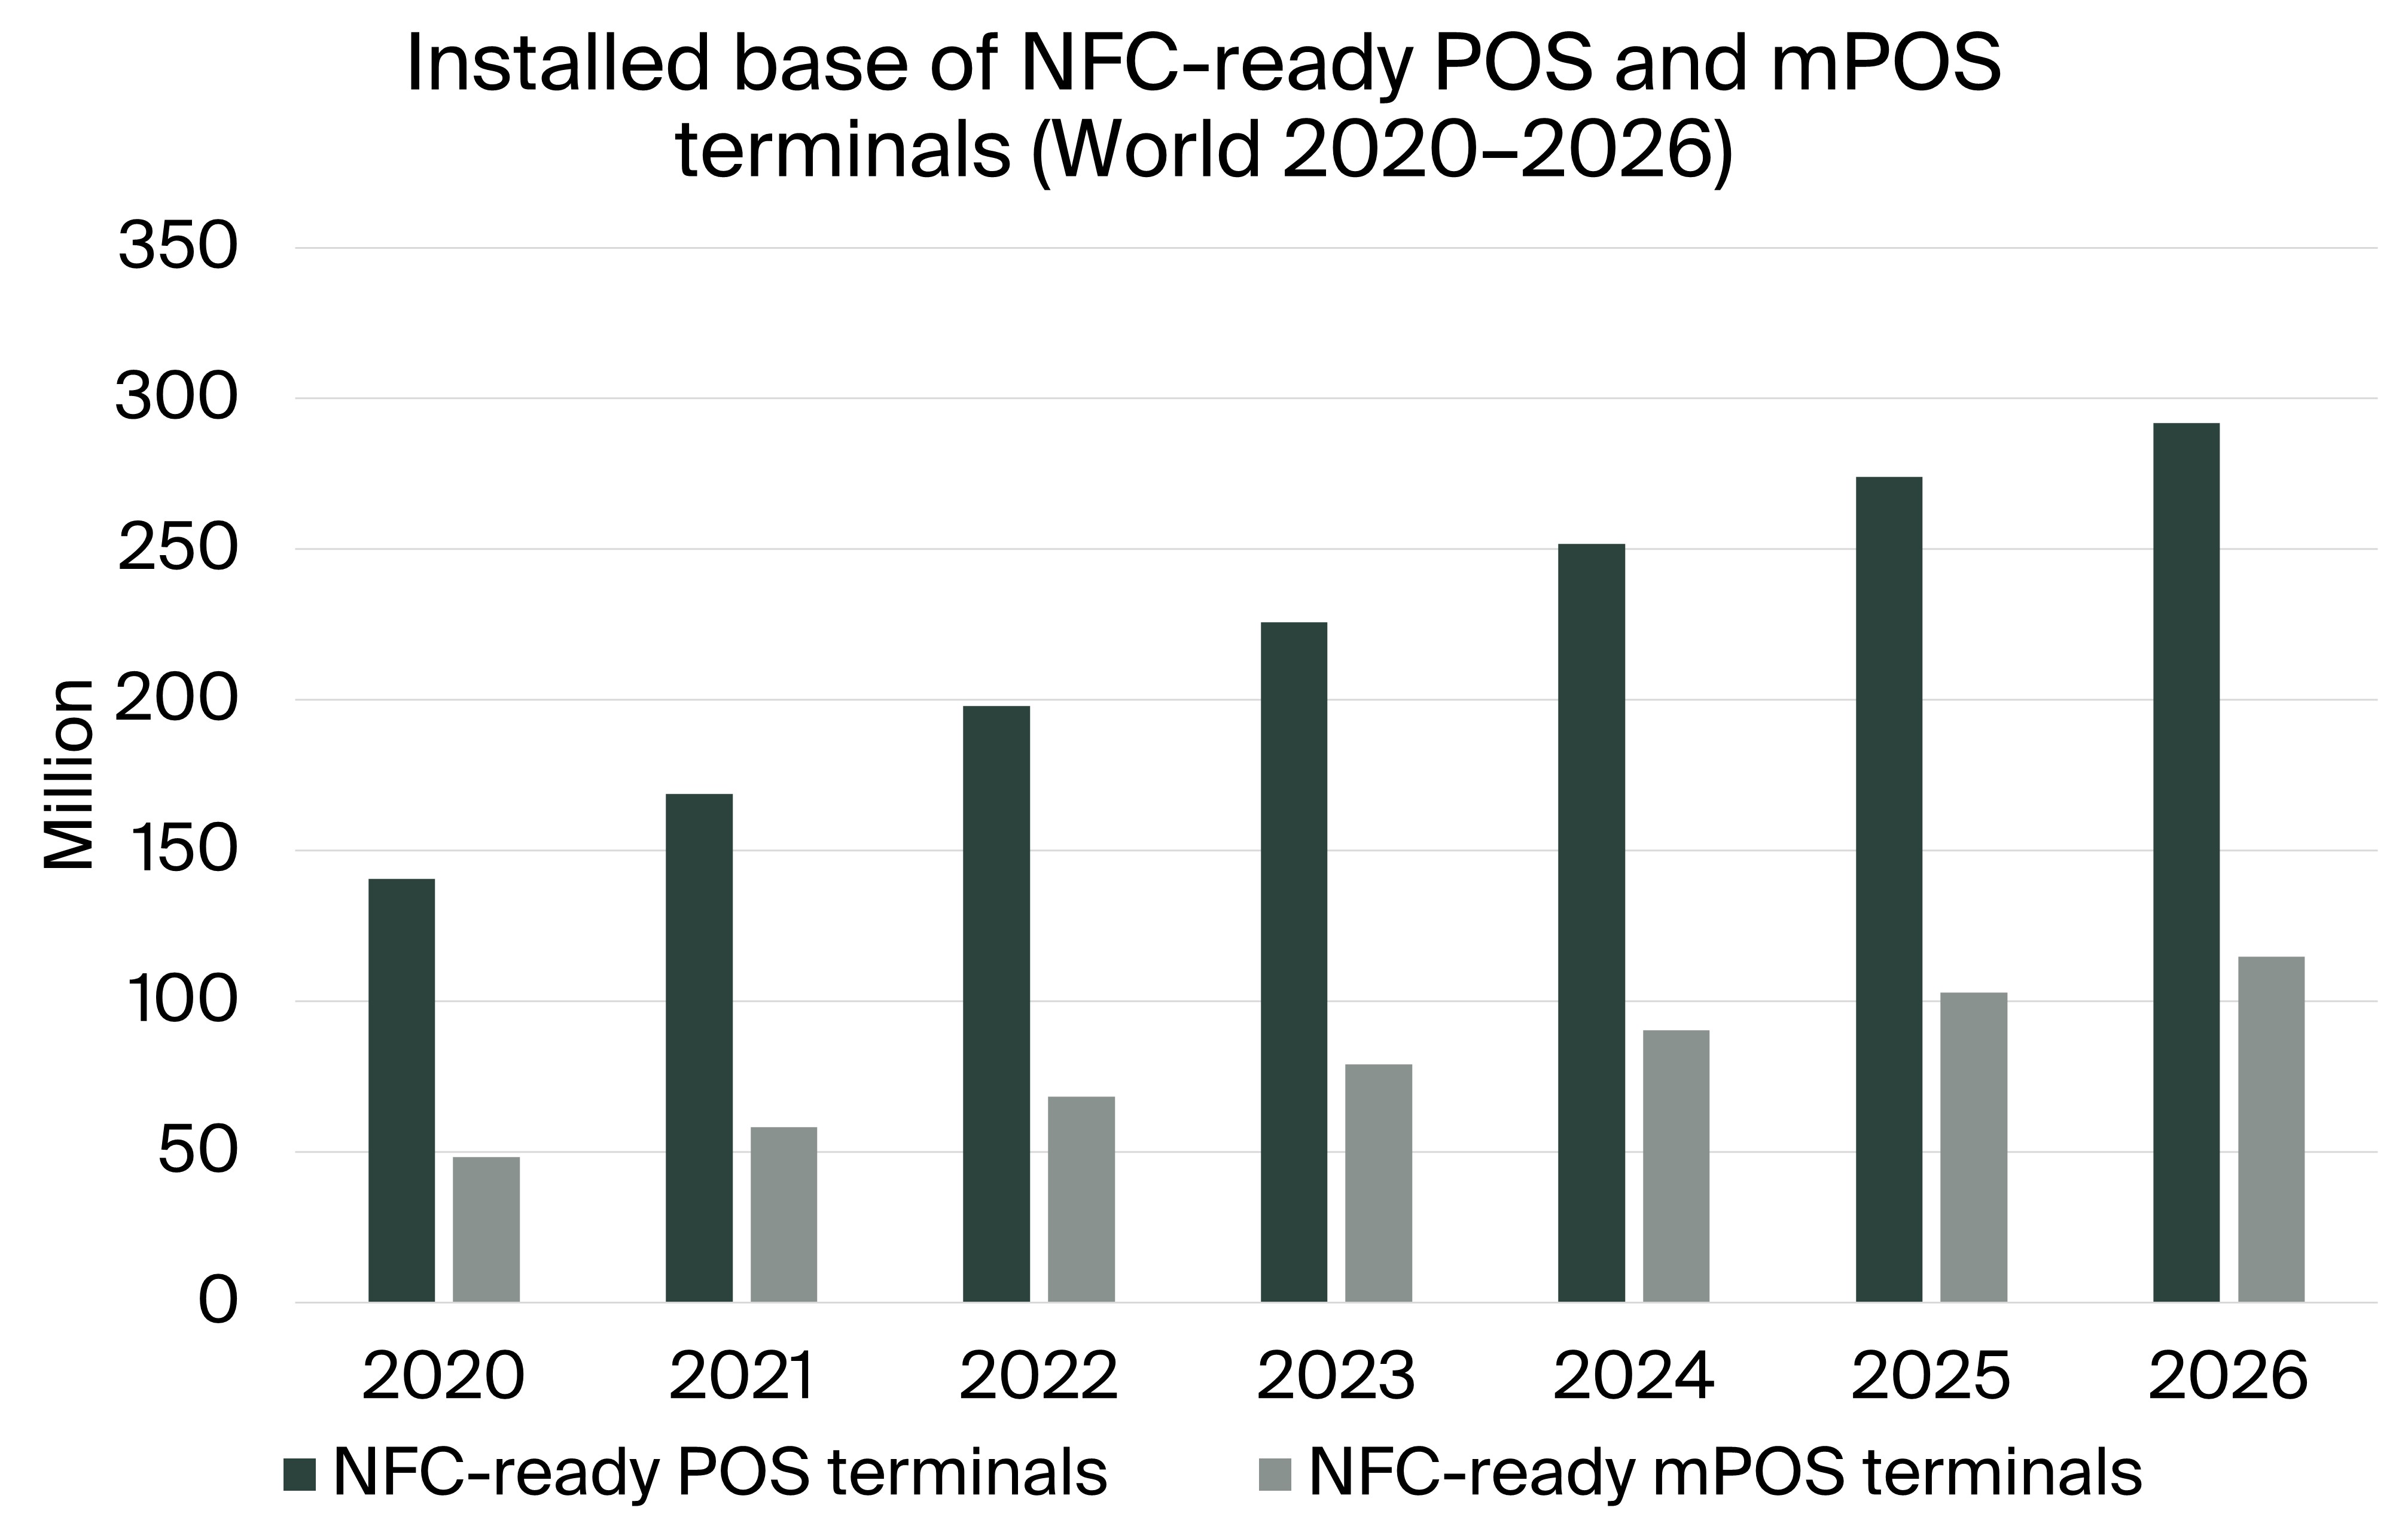 Shipments of NFC-ready POS terminals reached 75.3 million in 2021